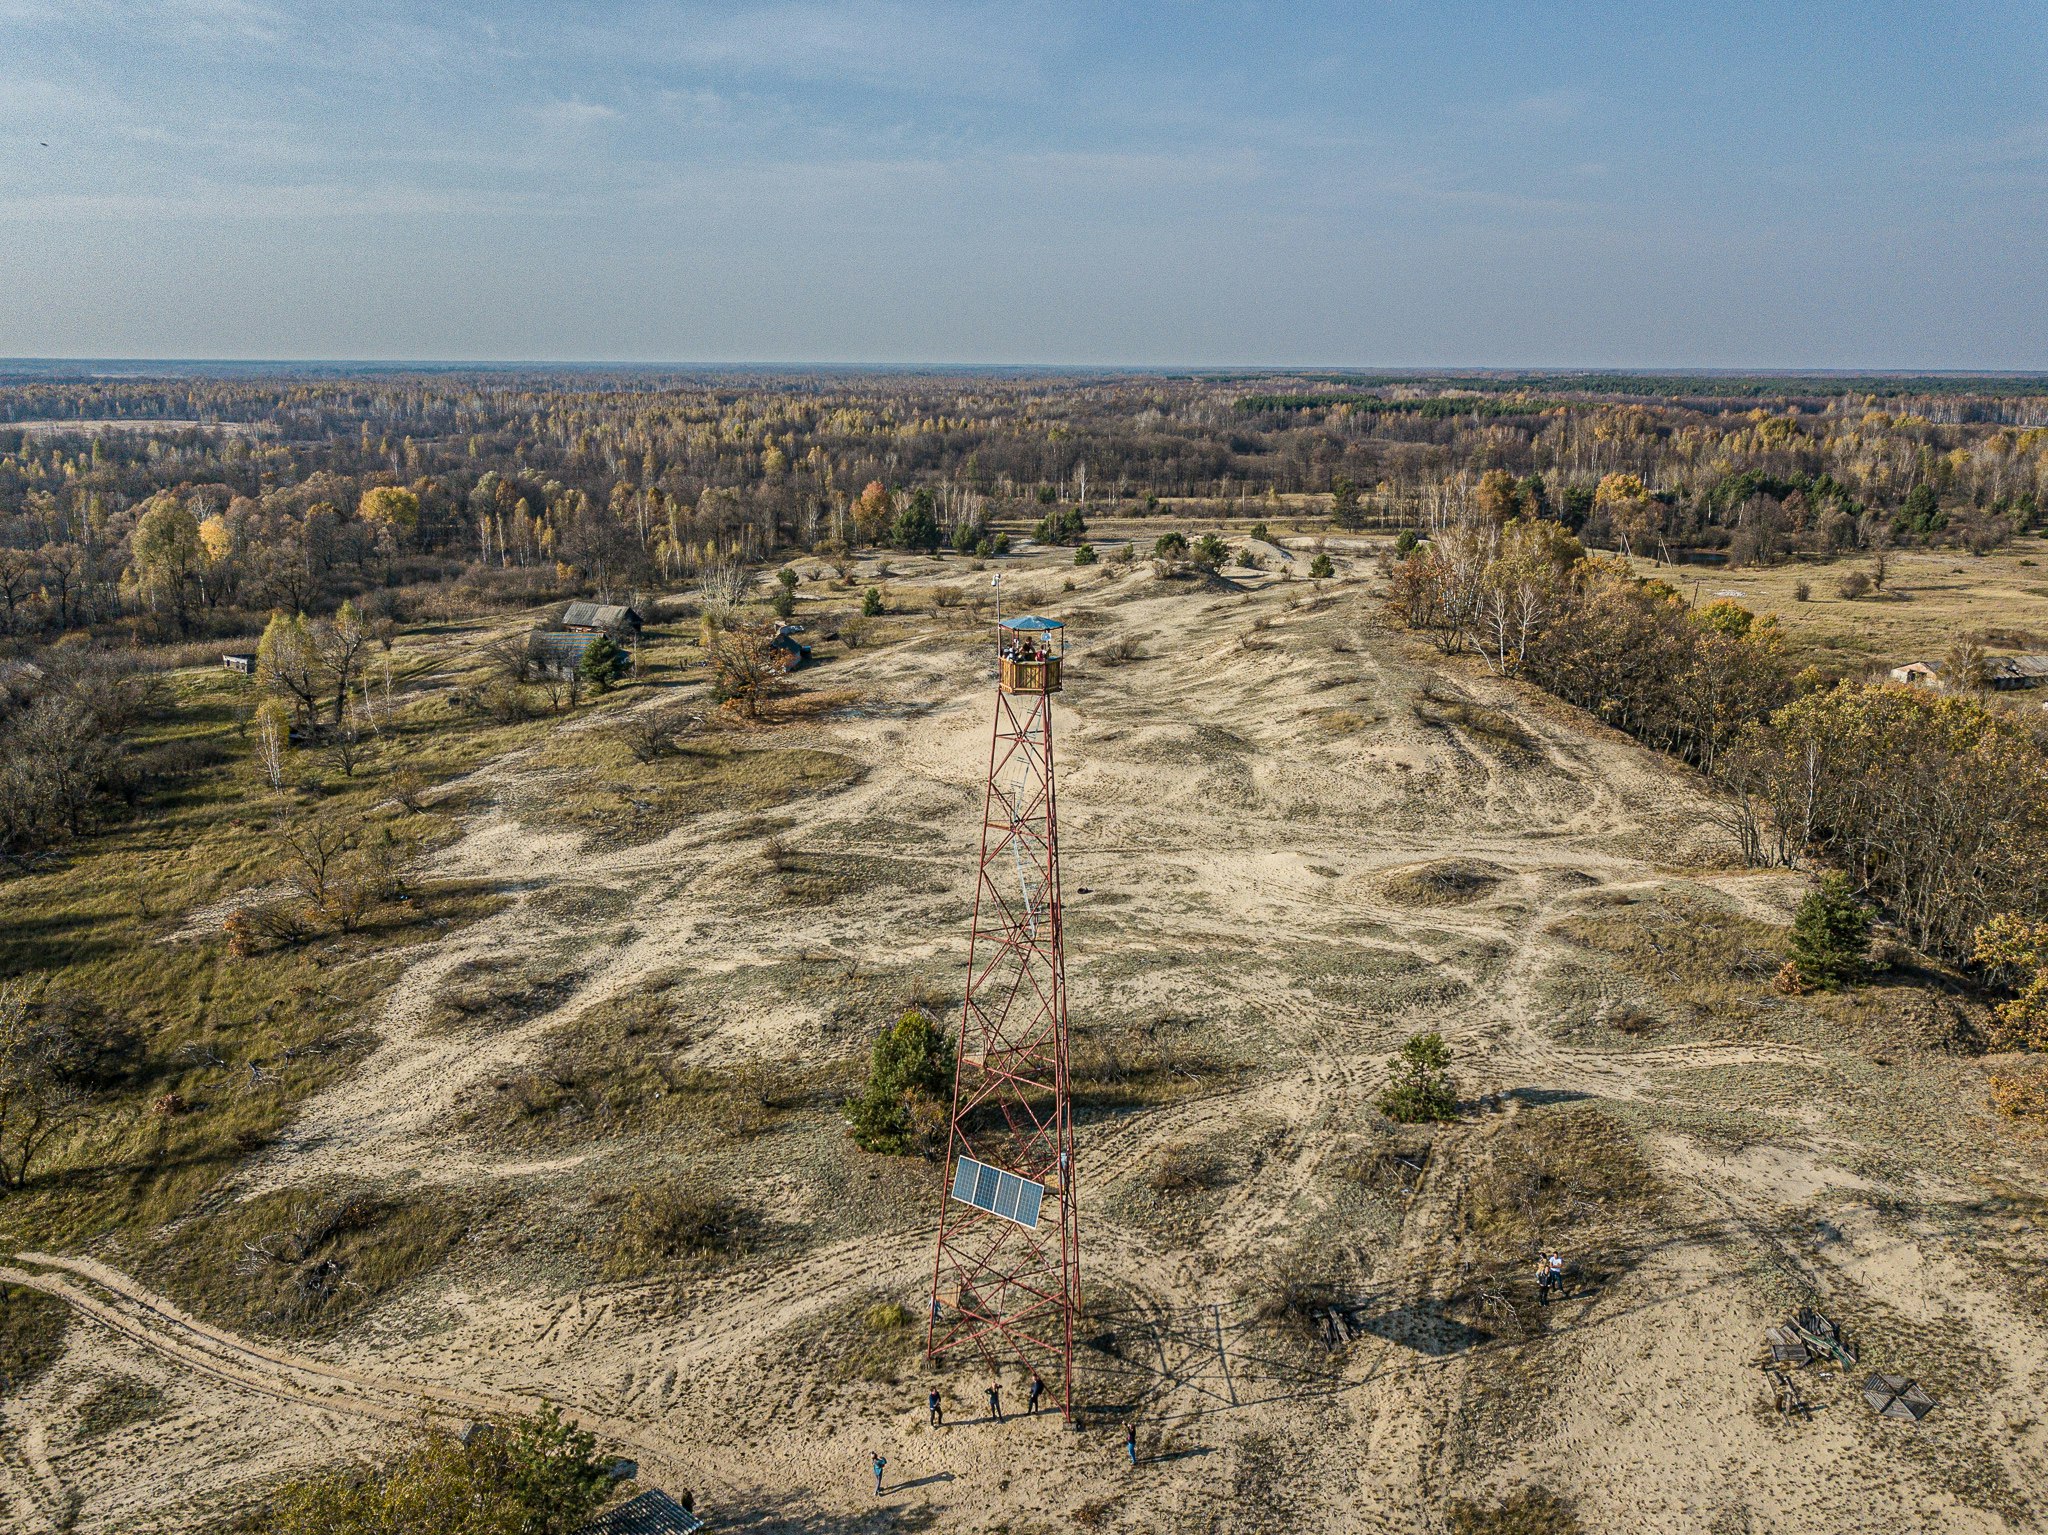 A firetower stands with Chernobyl somewhere in distance. 